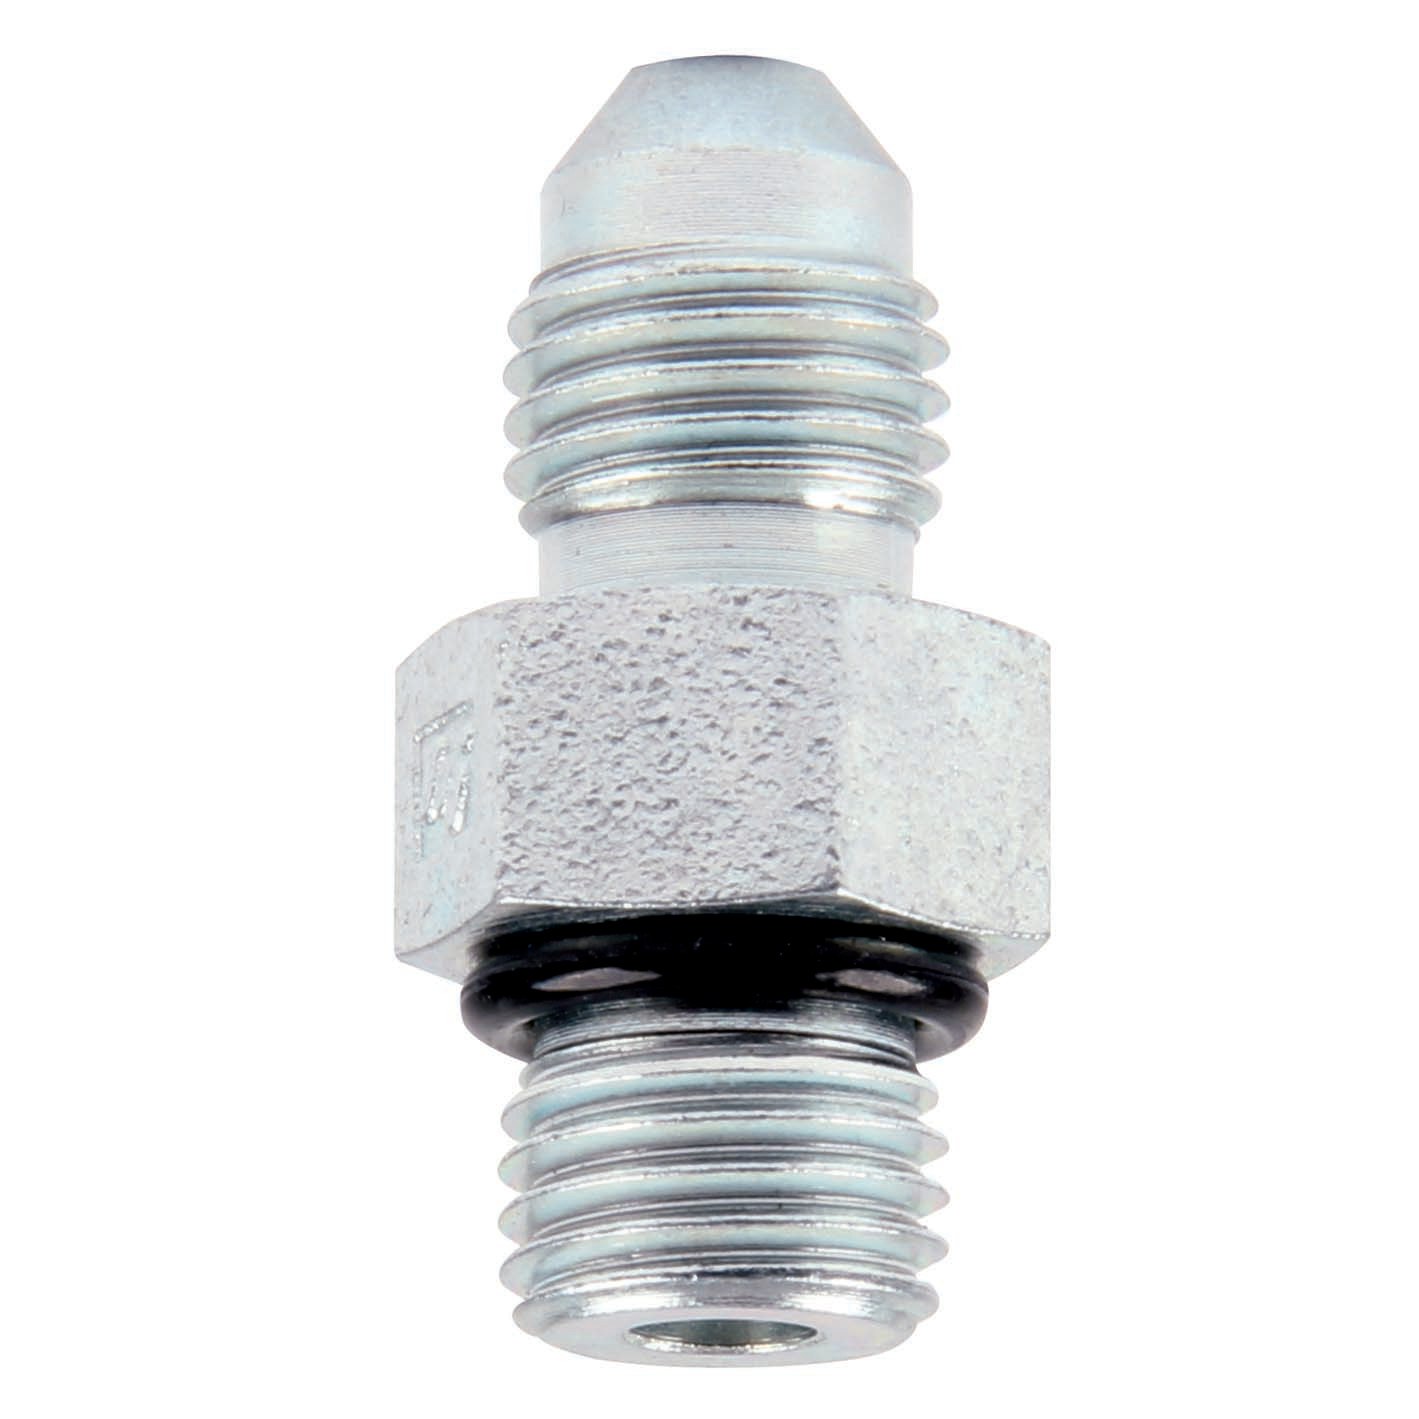 Adapter Fittings -4 to 7/16-20 10pk